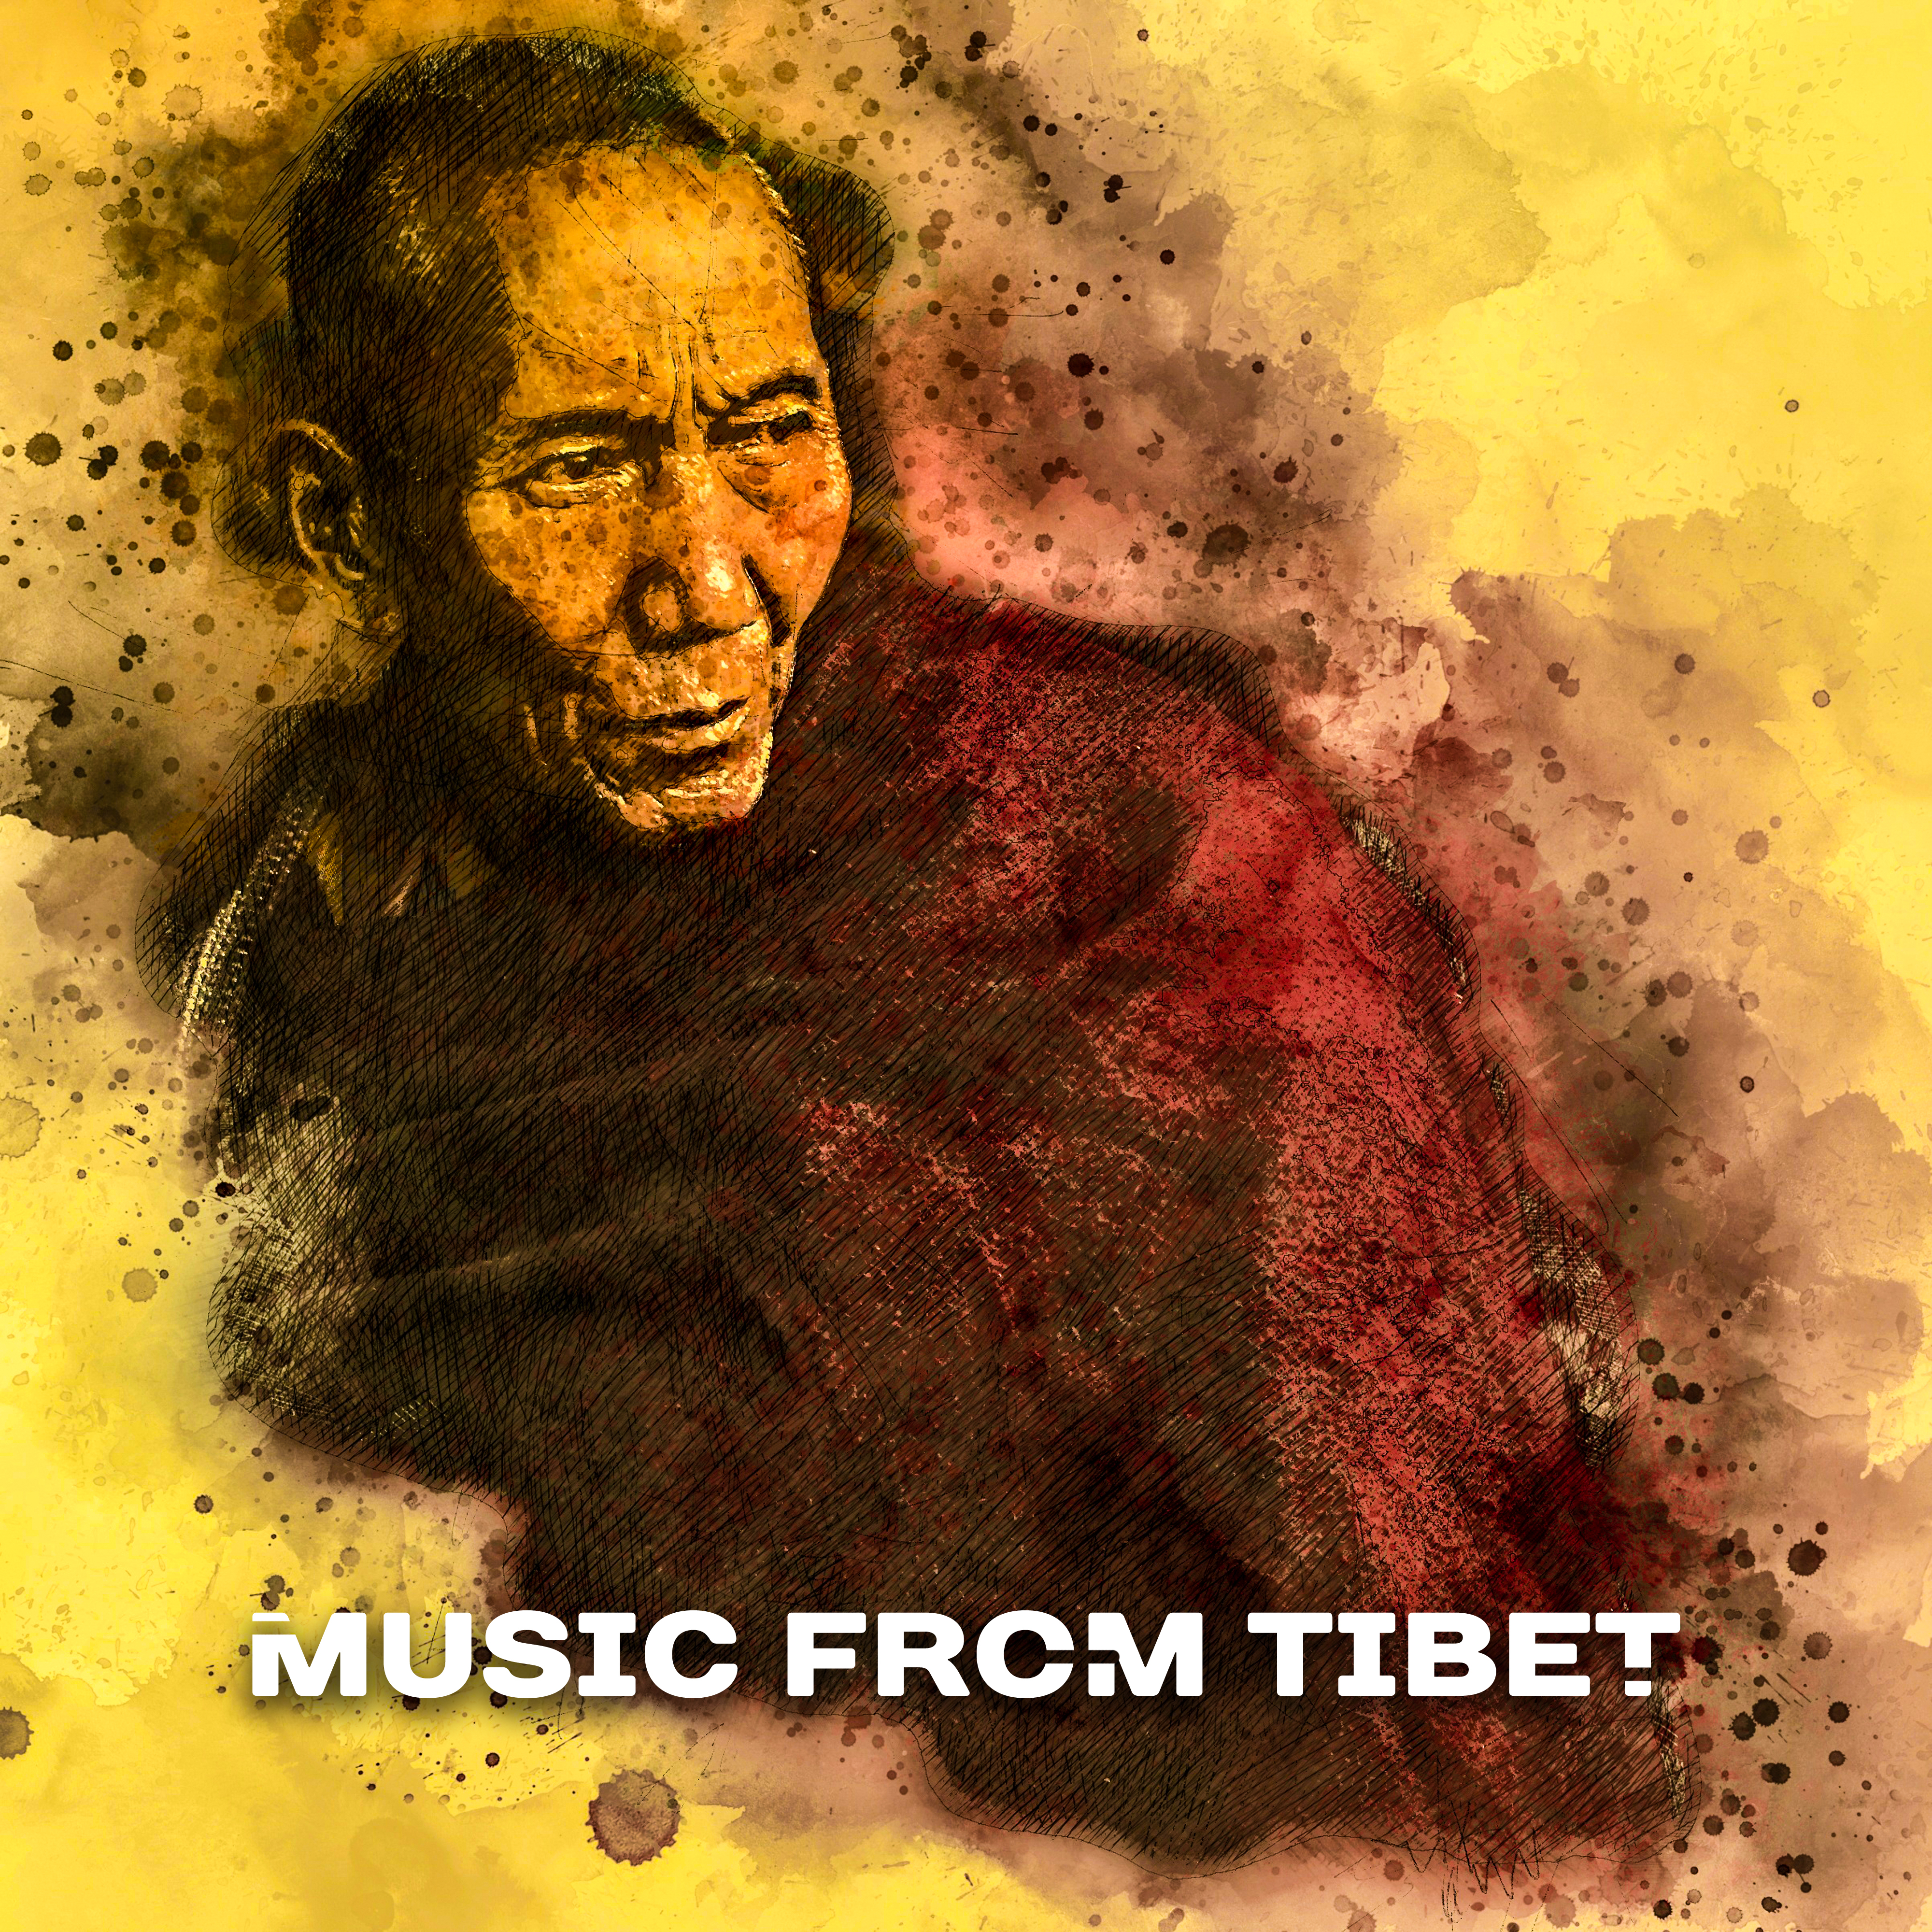 Music from Tibet – Peaceful Sounds for Meditation, Yoga, Relaxation, Chakra Balancing, Training Yoga, Soft Mindfulness, Inner Zen